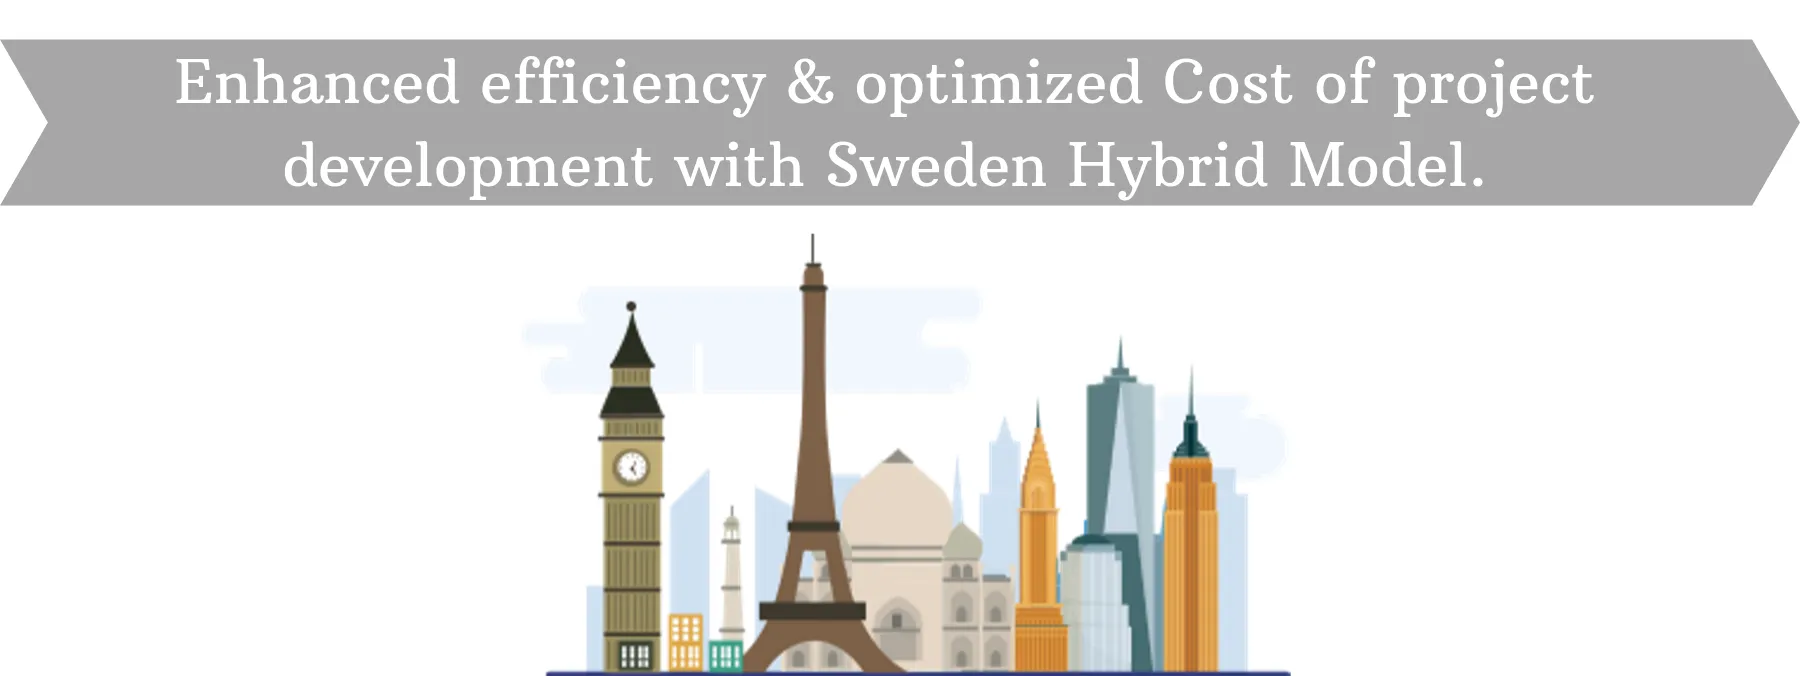 Enhanced Efficiency & Optimized Cost of Project Development with Sweden Hybrid Model.